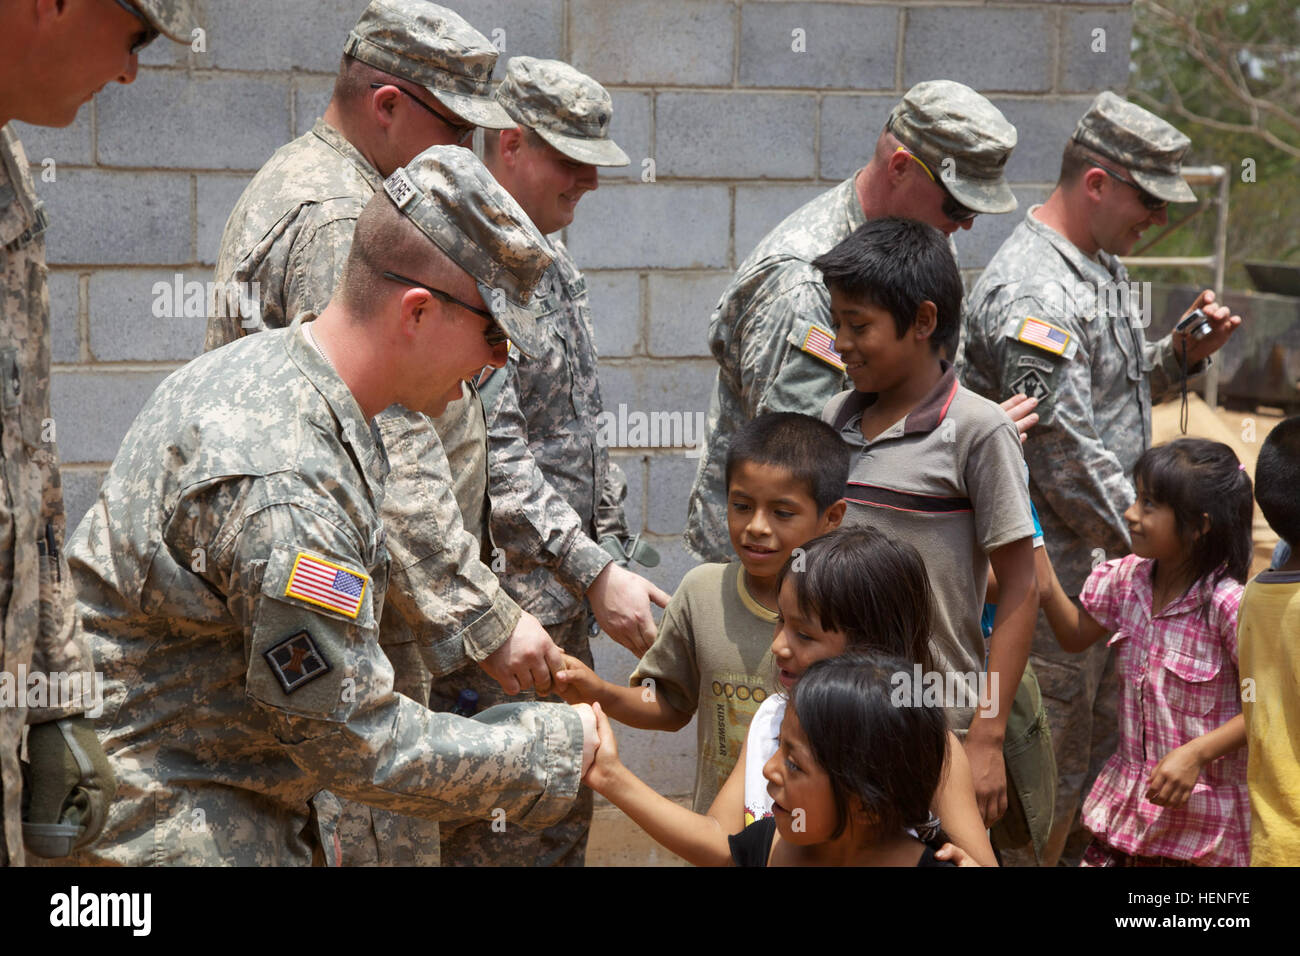 A group of U.S. Army Soldiers, assigned to the 1430th Engineer Company, shakes hands with a group of Guatemalan school children after touring their new school during Beyond the Horizon, Chiquimula, Guatemala, May 8, 2014. Beyond the Horizon is an annual exercise that embraces the partnership between the United States and Guatemala, to provide focused humanitarian assistance through various medical, dental, and civic action programs. (U.S. Army photo by Sgt. Austin Berner/Released) Beyond The Horizon - Guatemala 140508-A-BZ540-061 Stock Photo